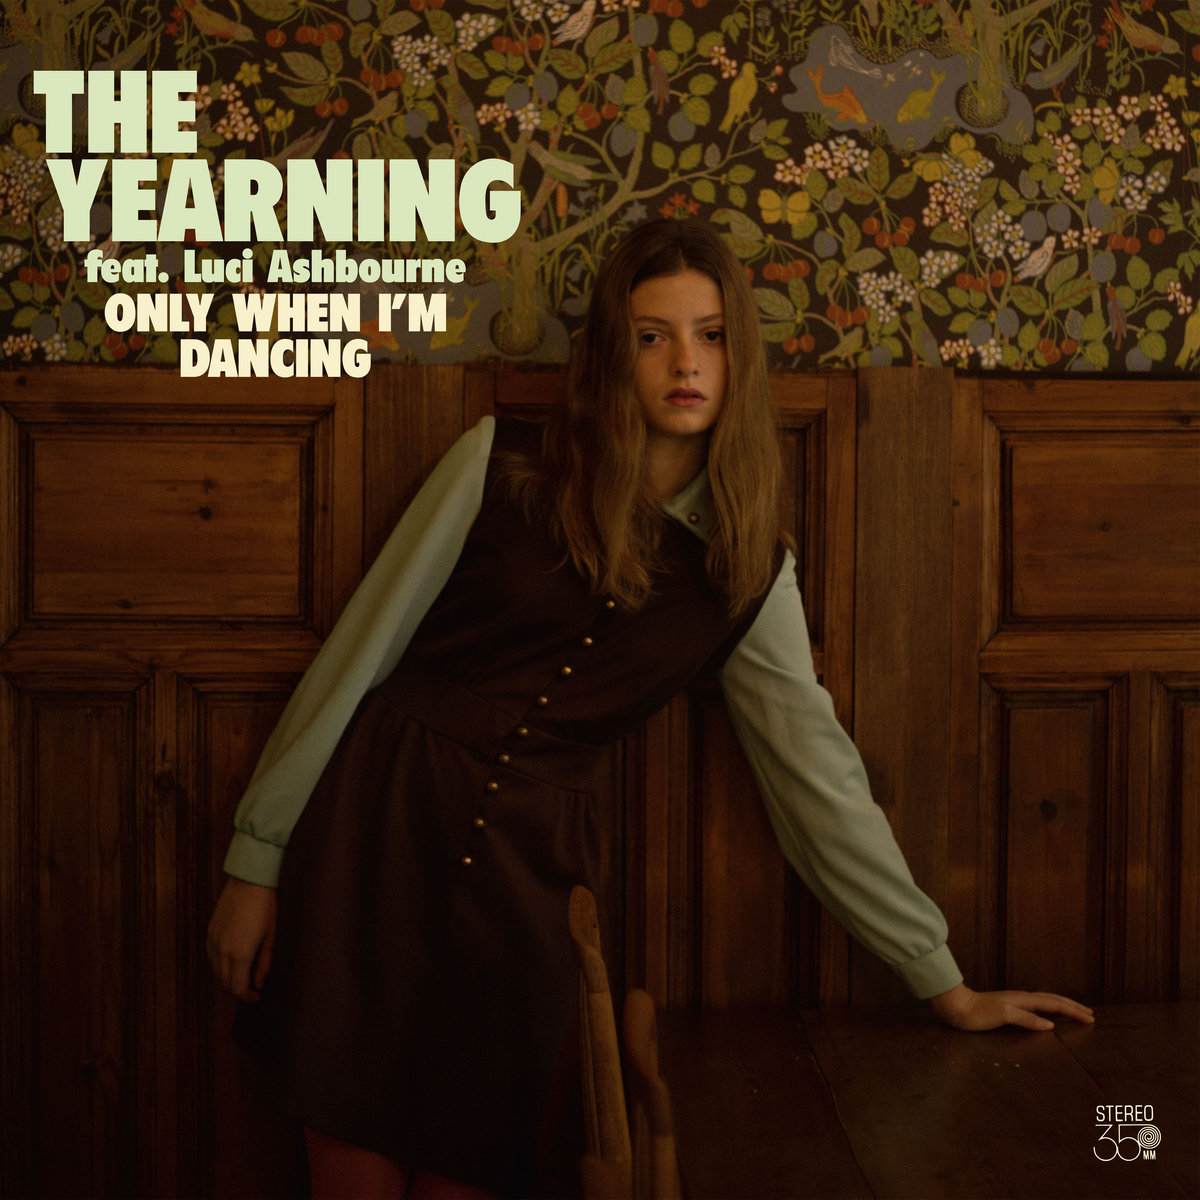 The Yearning "Only When I'm Dancing" CD